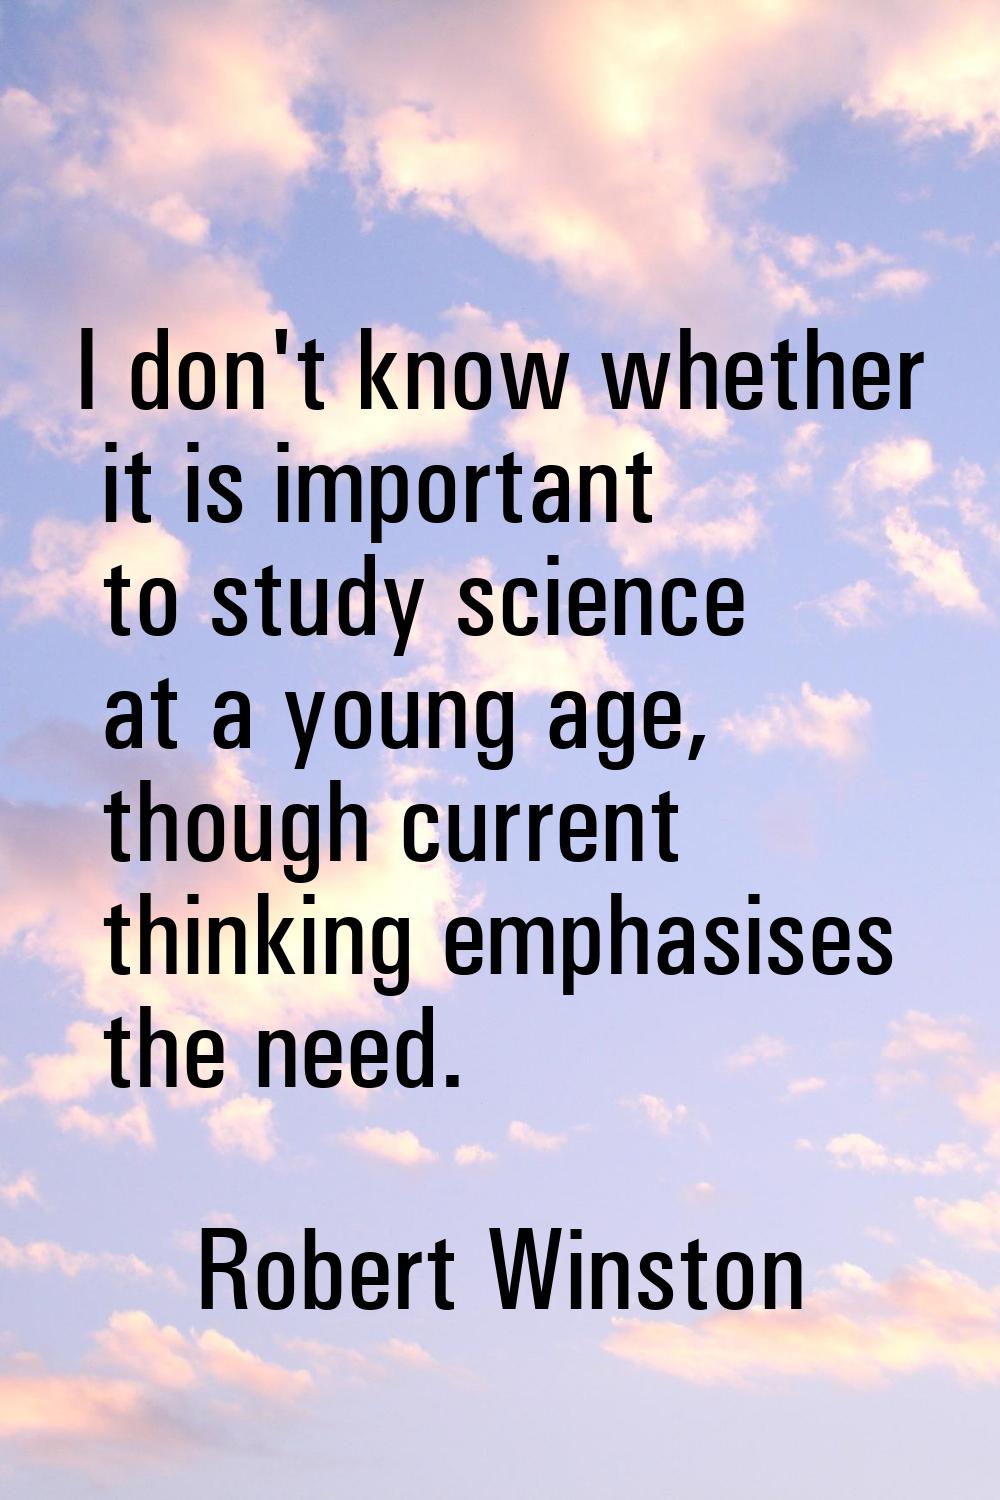 I don't know whether it is important to study science at a young age, though current thinking empha